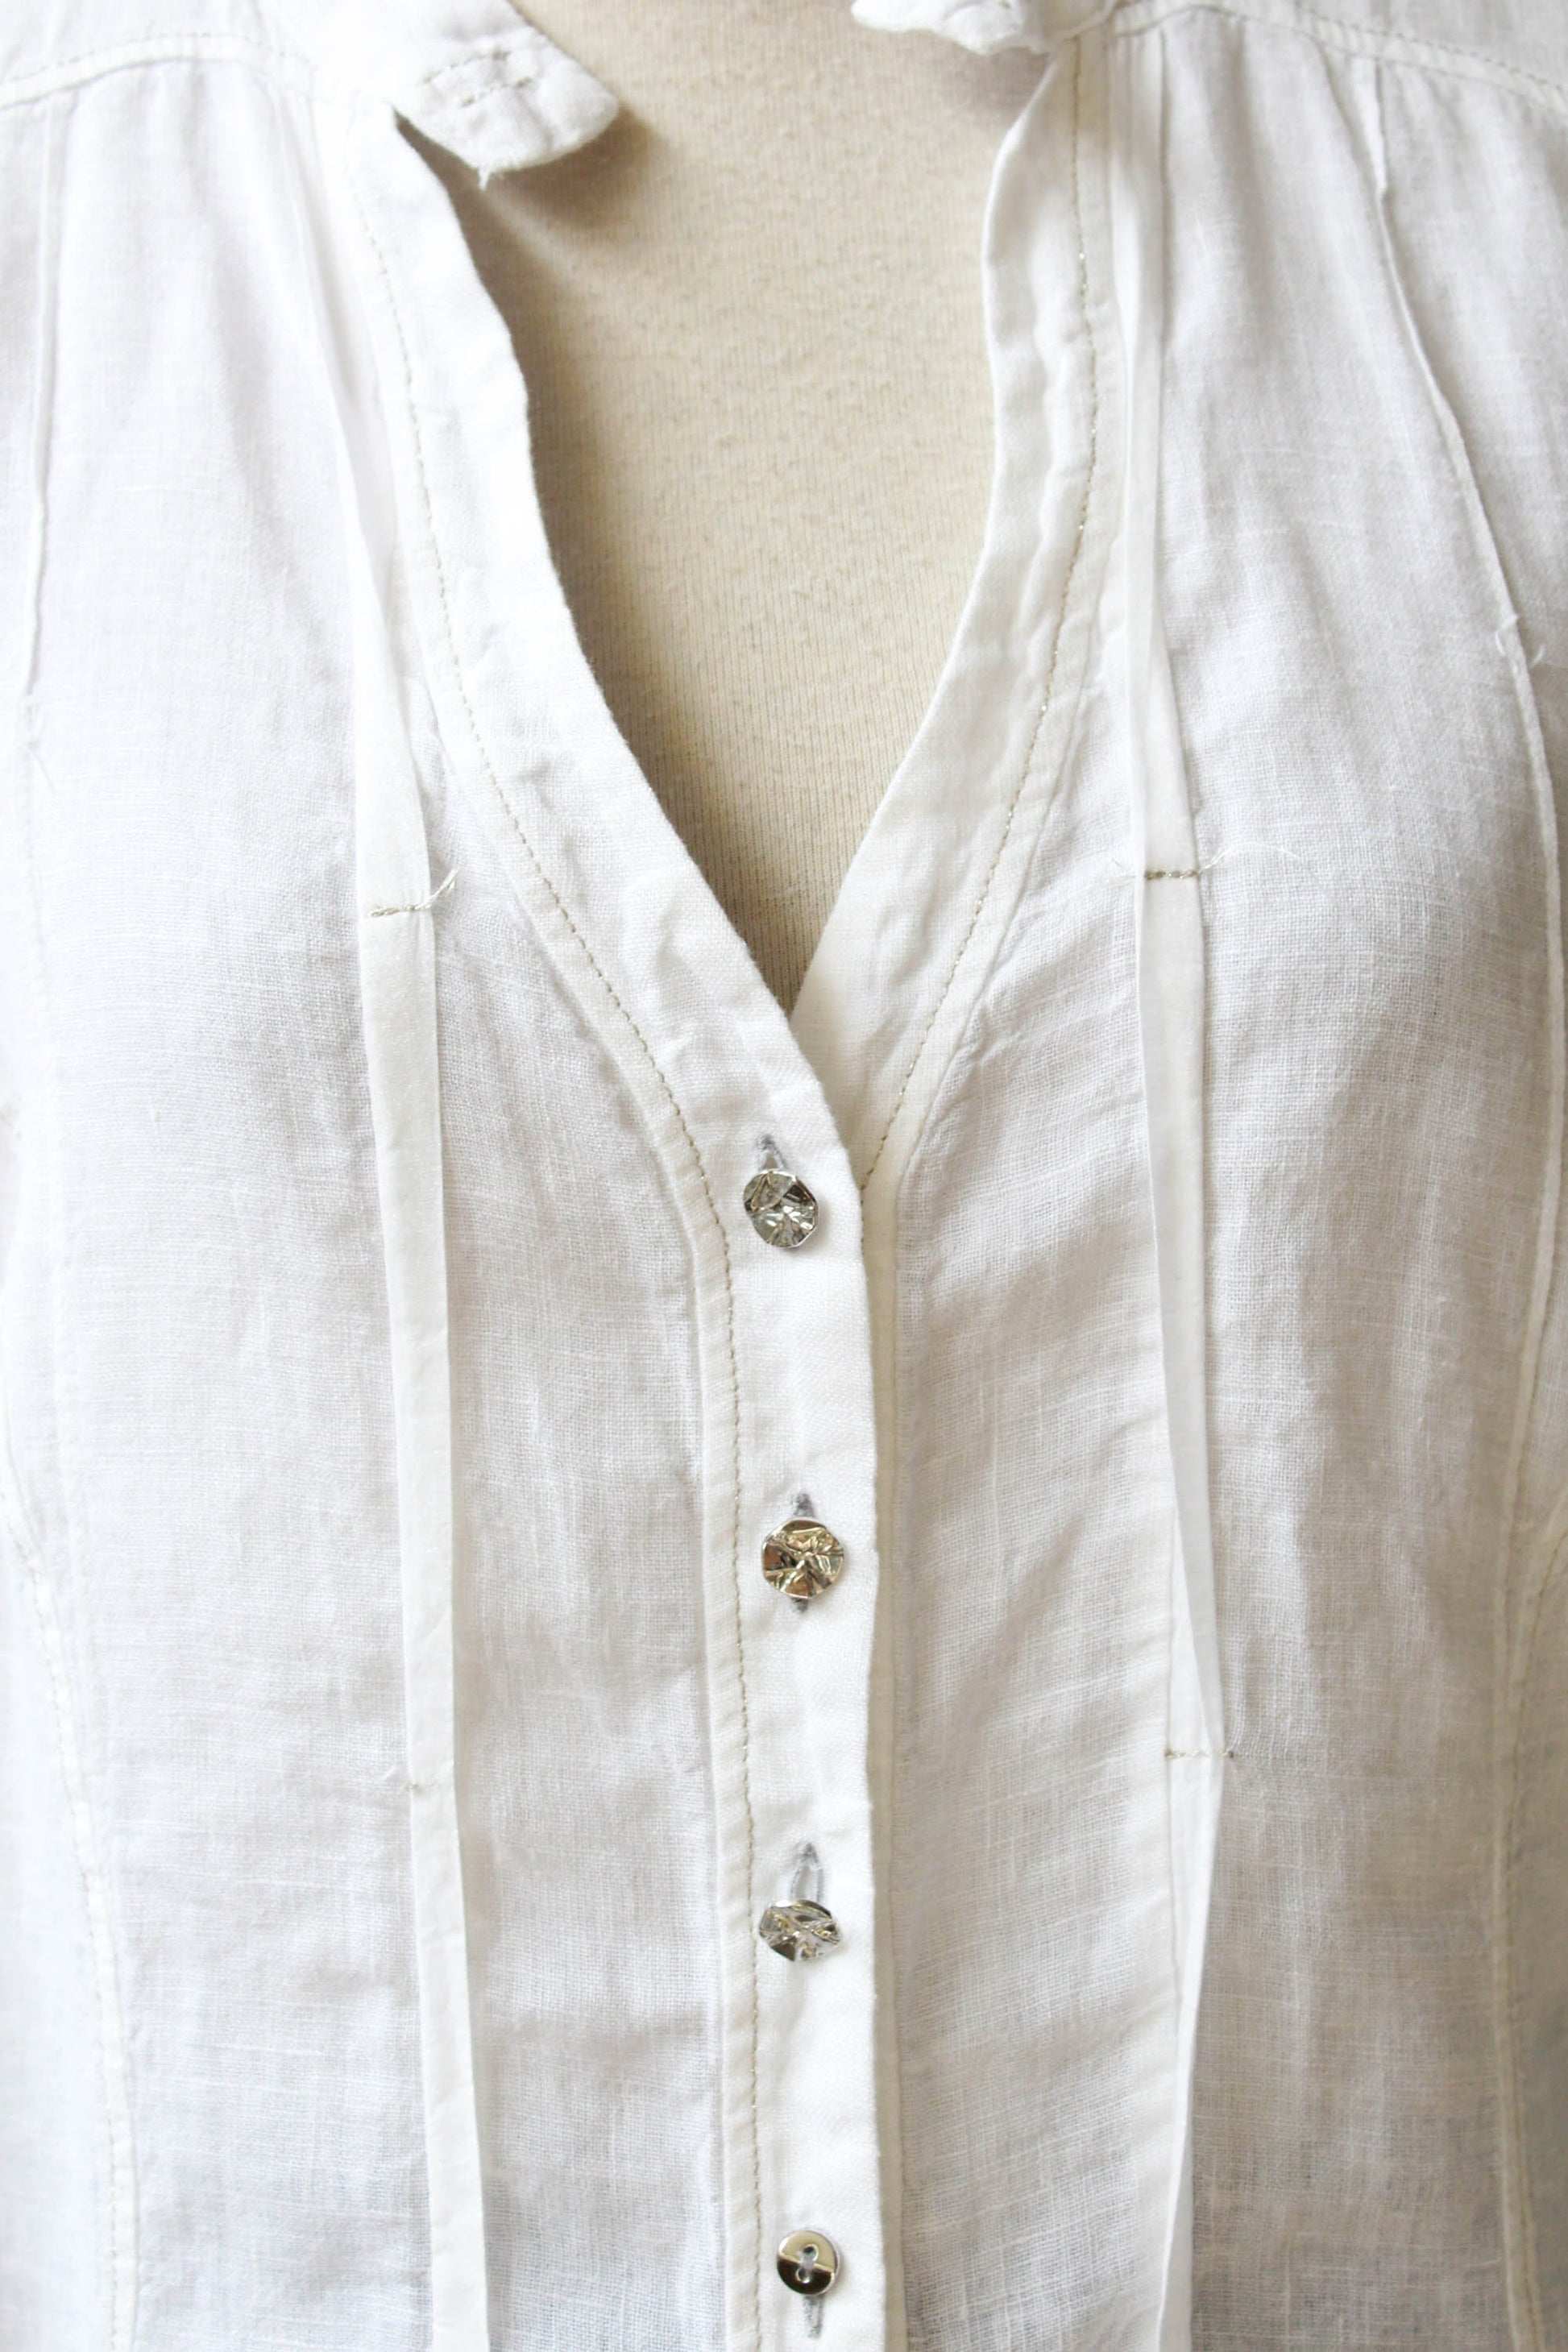 elisa cavaletti white linen button up blouse with eyelet embroidered flared sleeves, silver buttons